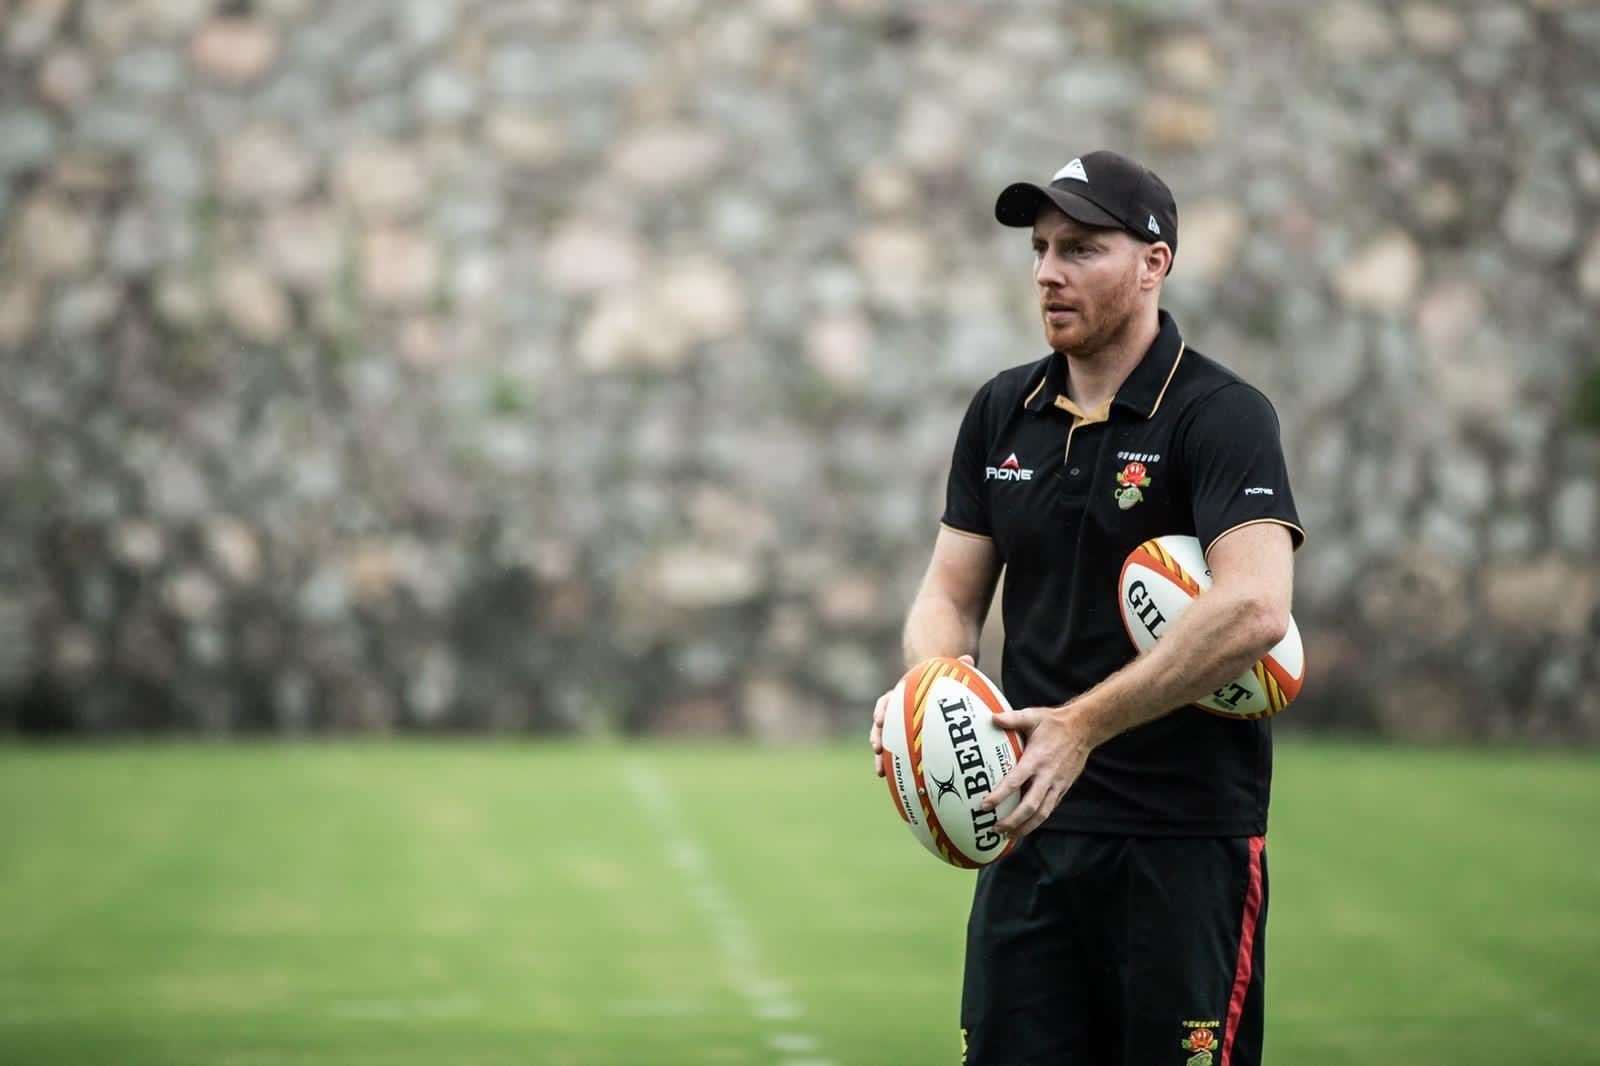 Euan Mackintosh grew up through the Highland Rugby Club youth system.